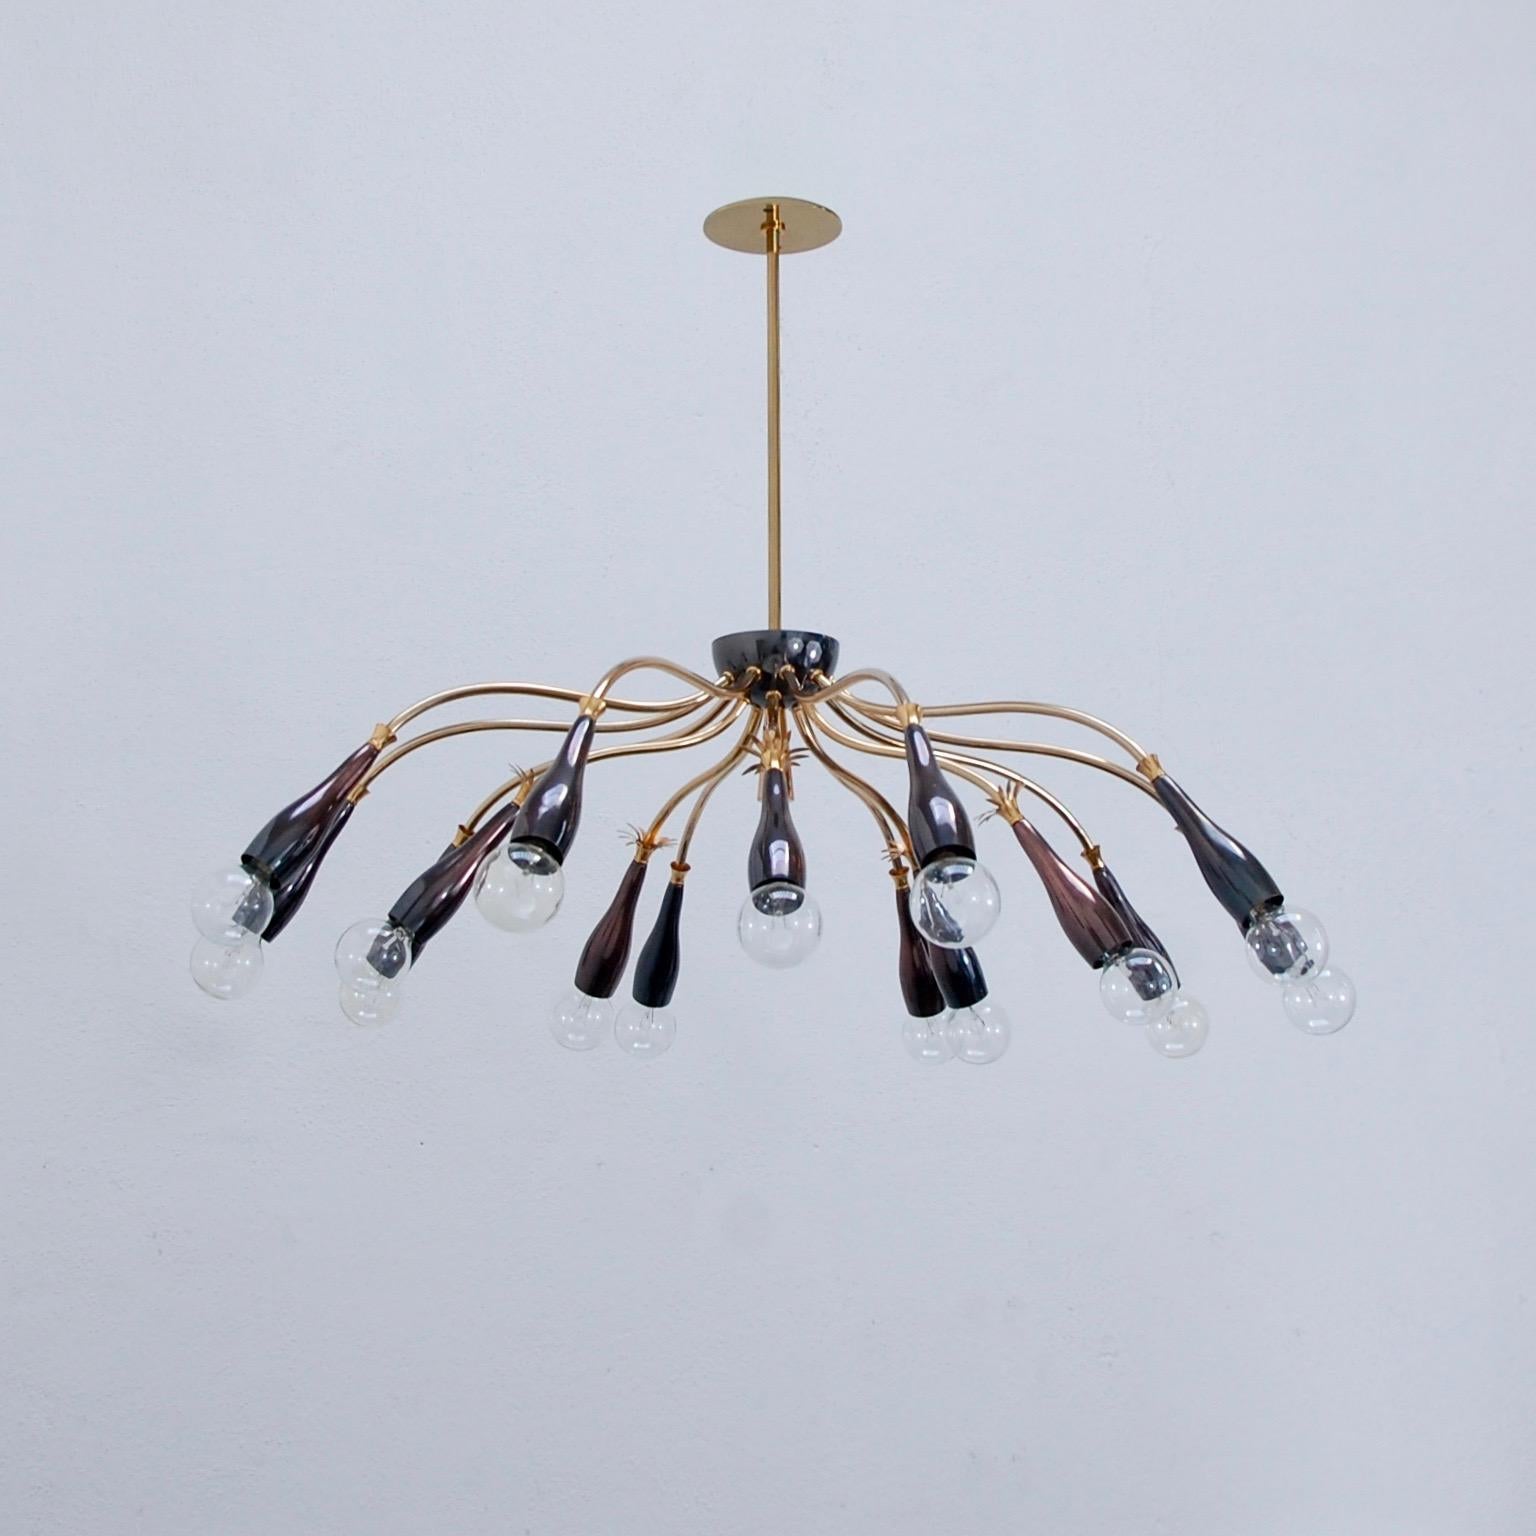 Immaculate 15 light midcentury French chandelier. True to the period with botanical details. Completely rewired for use in the US. E12 light bulbs (1 per socket). Light bulbs included with order.
Measures: Drop 22.5”
Fixture height 10.5”
Diameter